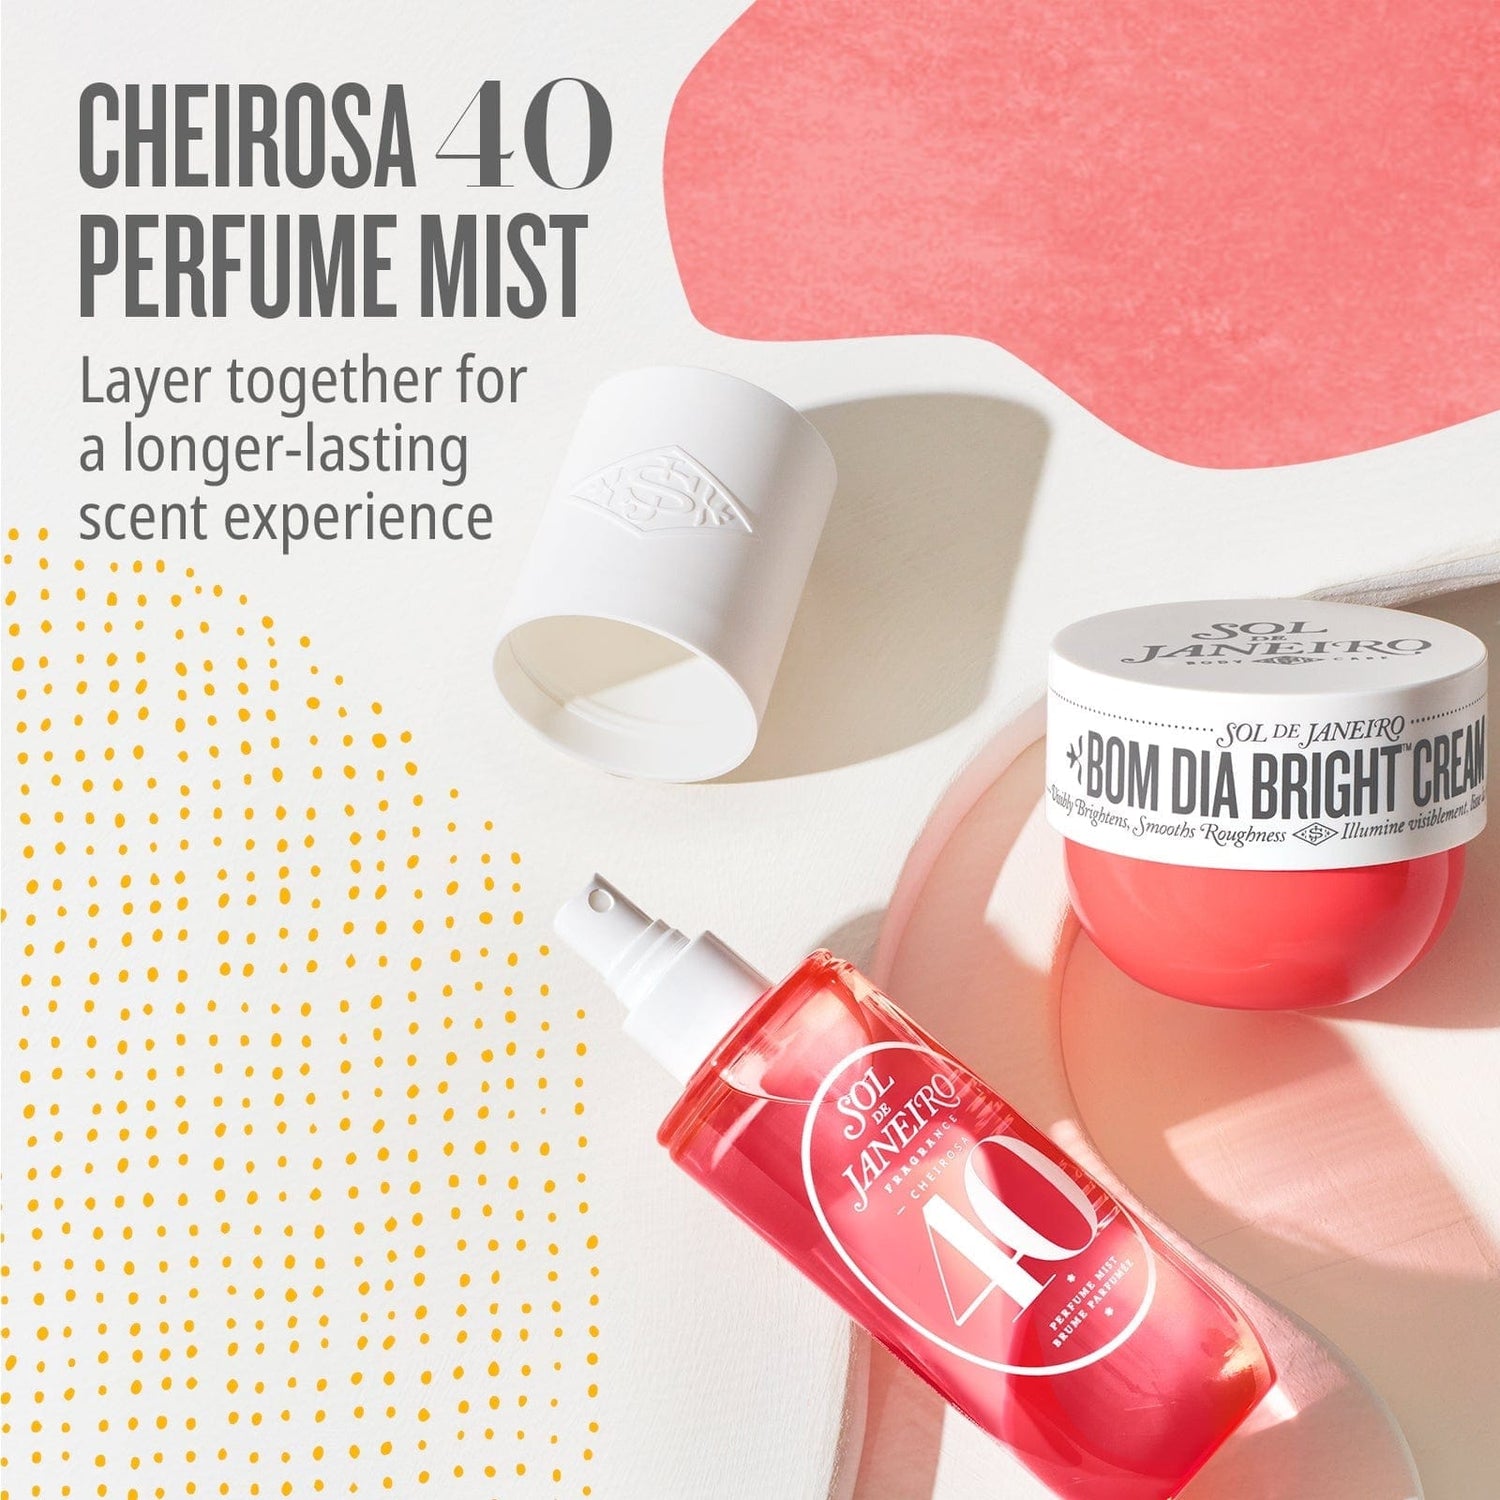 Cheirosa 40 perfume mist layer together for a longer-lasting scent experience.